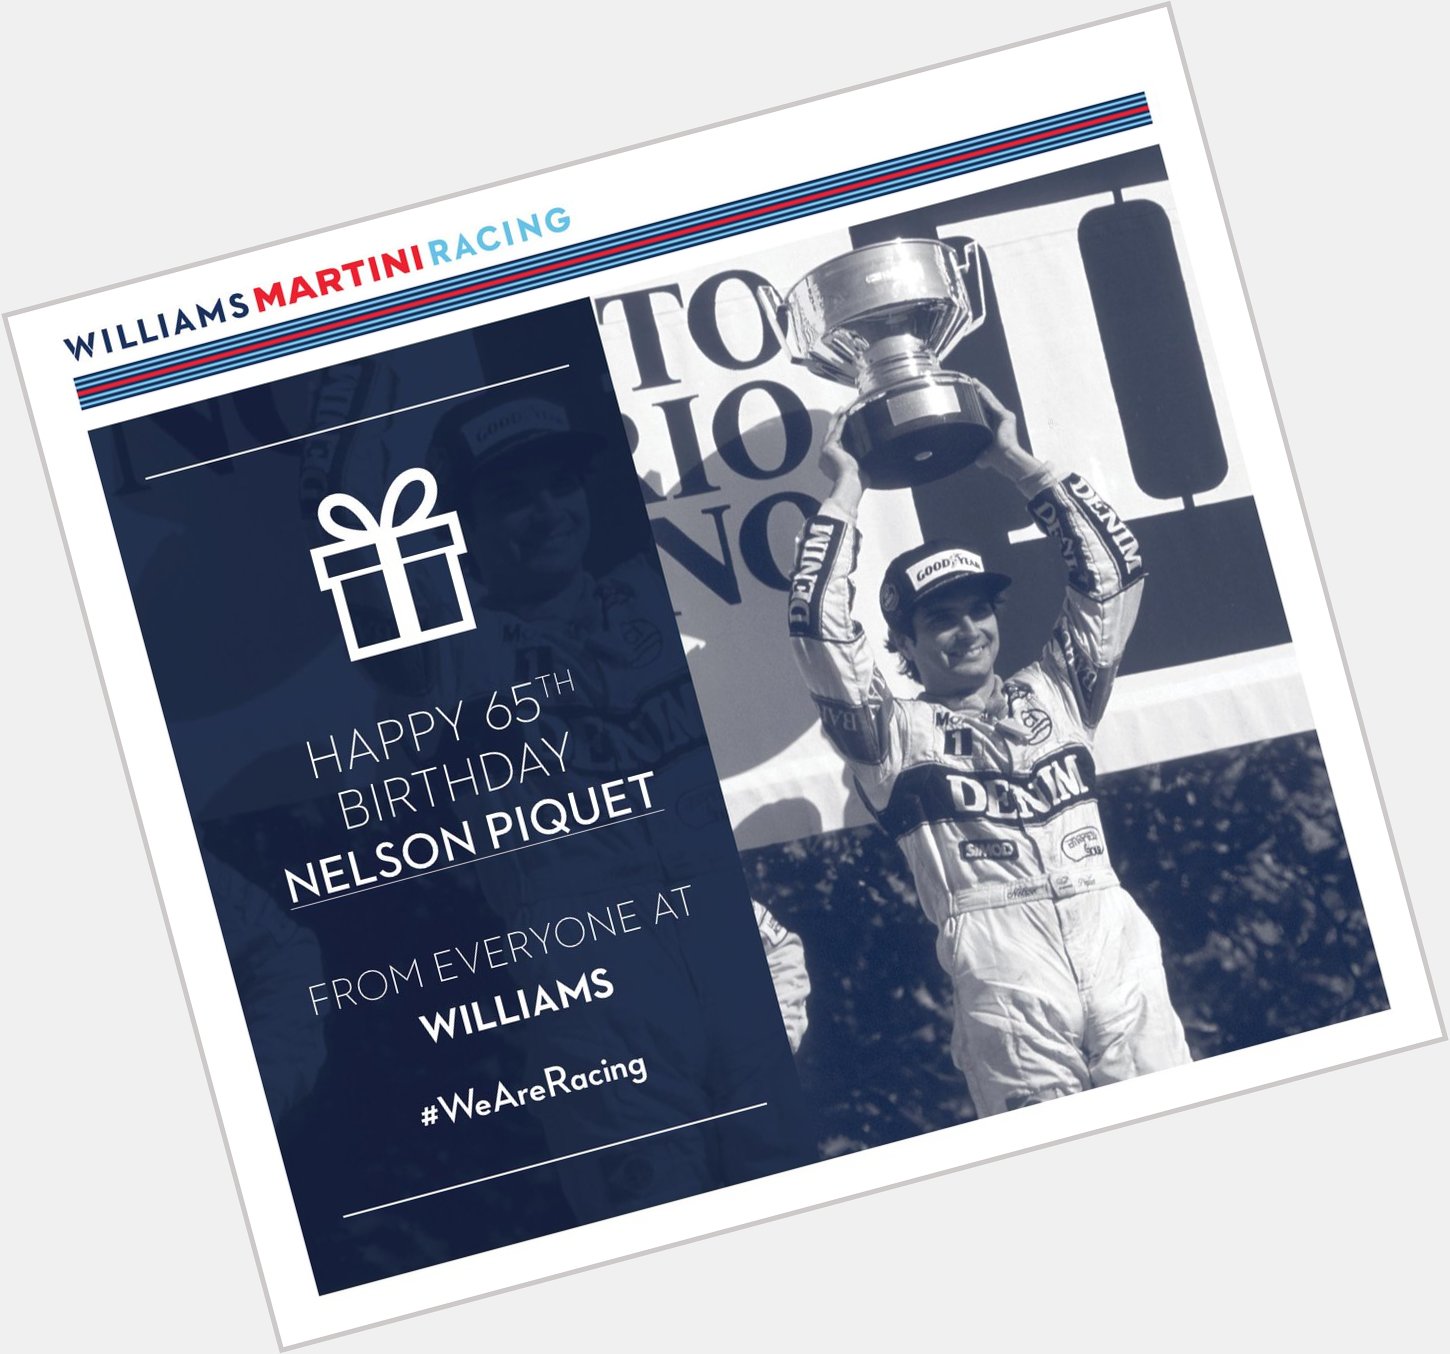 From all at Williams, we would like to wish a very big happy birthday to Nelson Piquet! 